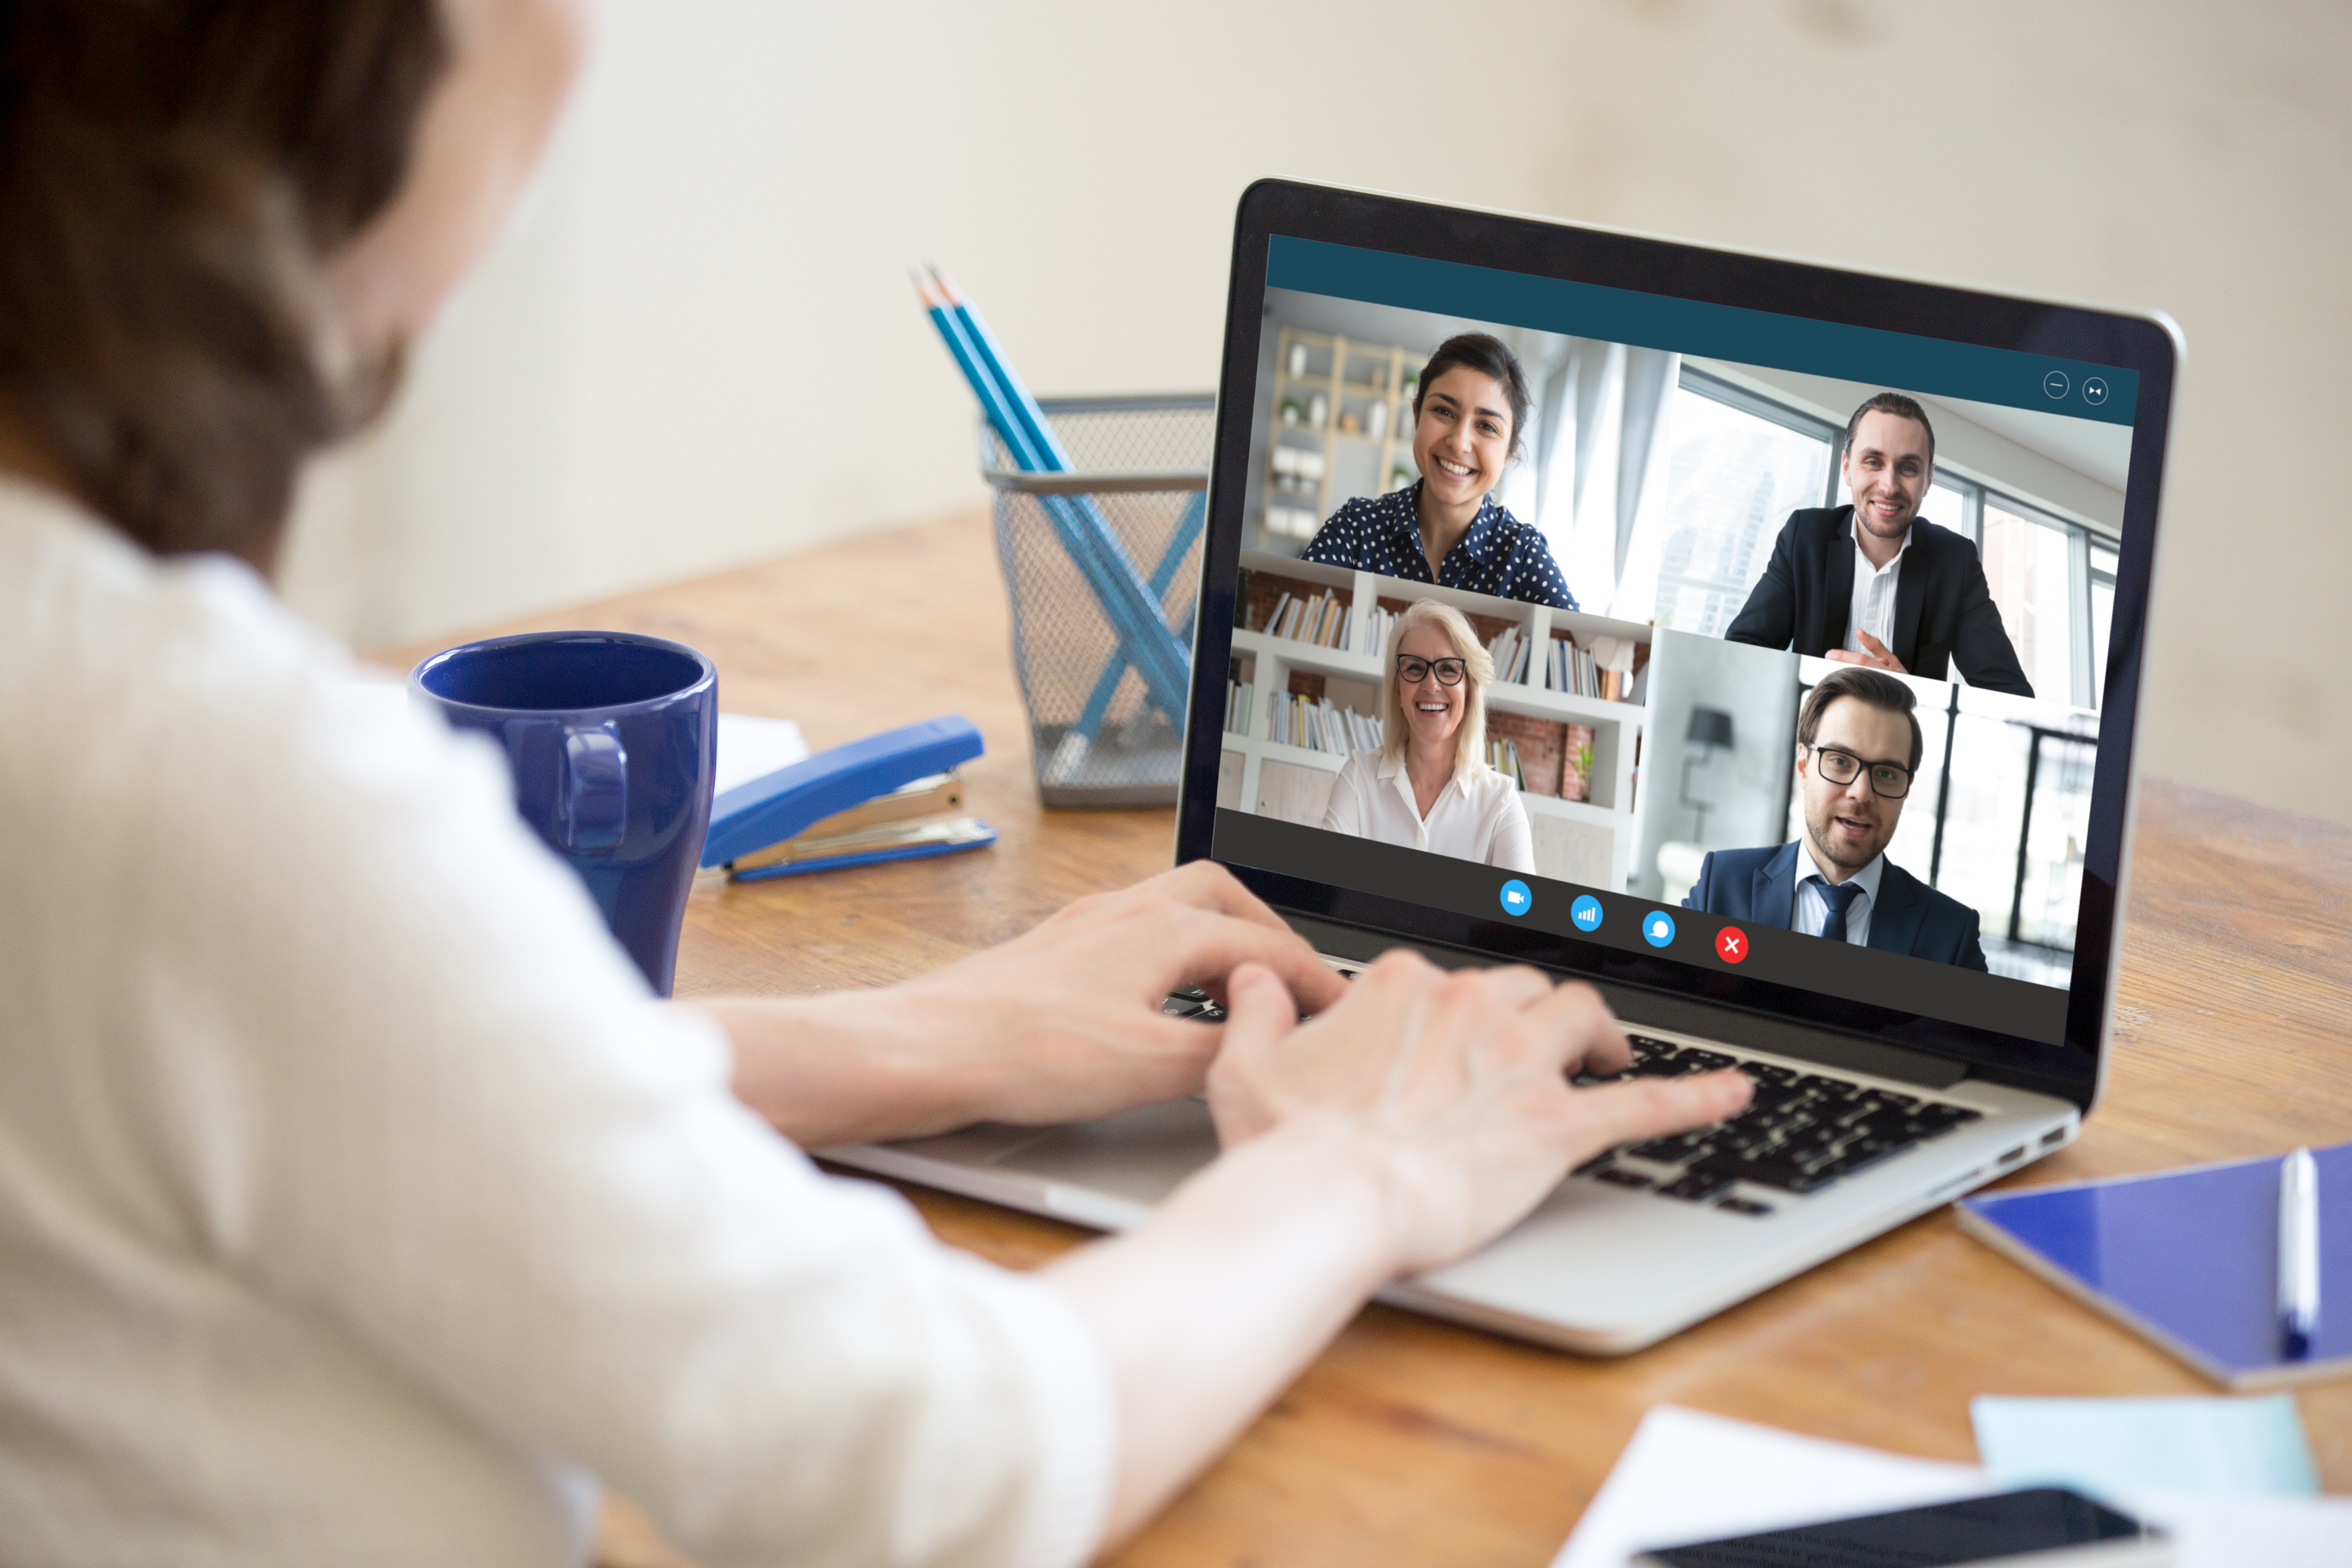 Woman working from home participating in group video call